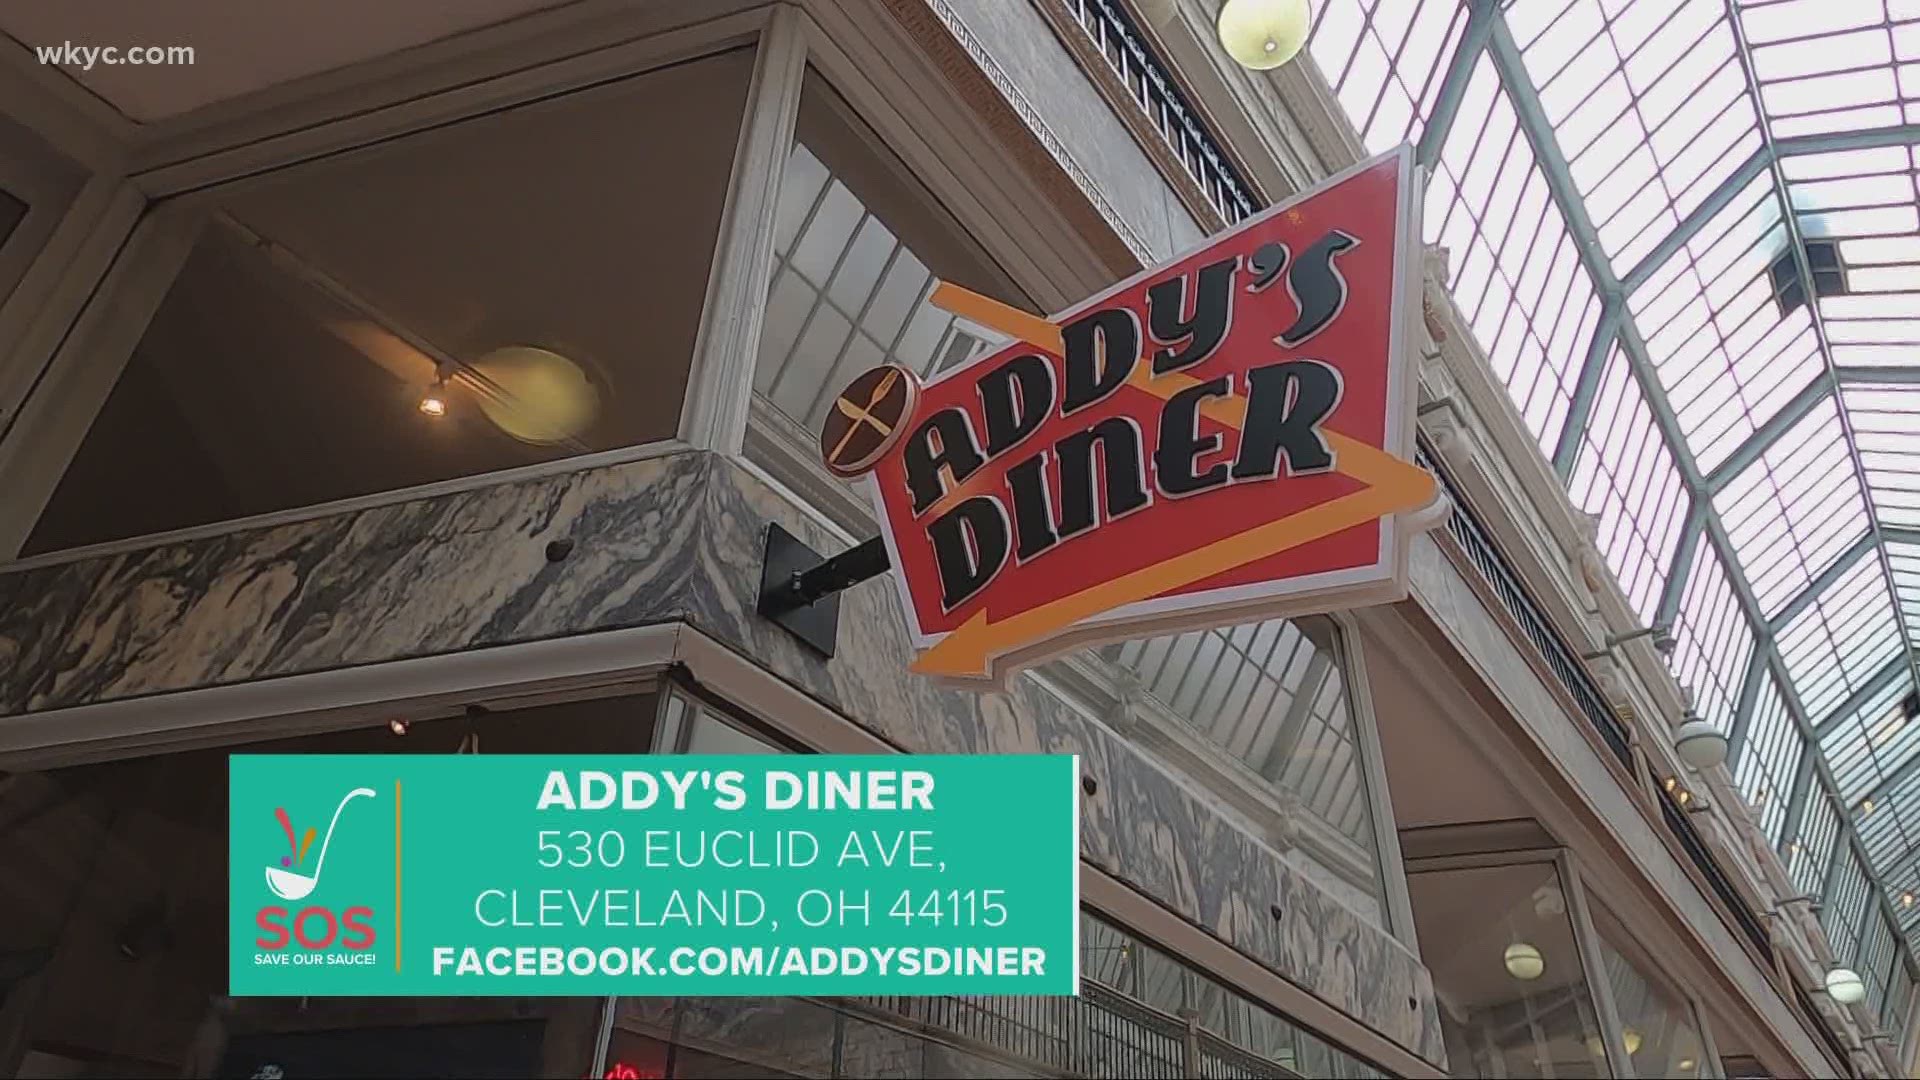 Today we shine the spotlight on Addy's Diner in downtown Cleveland as we continue the 'Save our Sauce' campaign to support Northeast Ohio restaurants amid COVID-19.